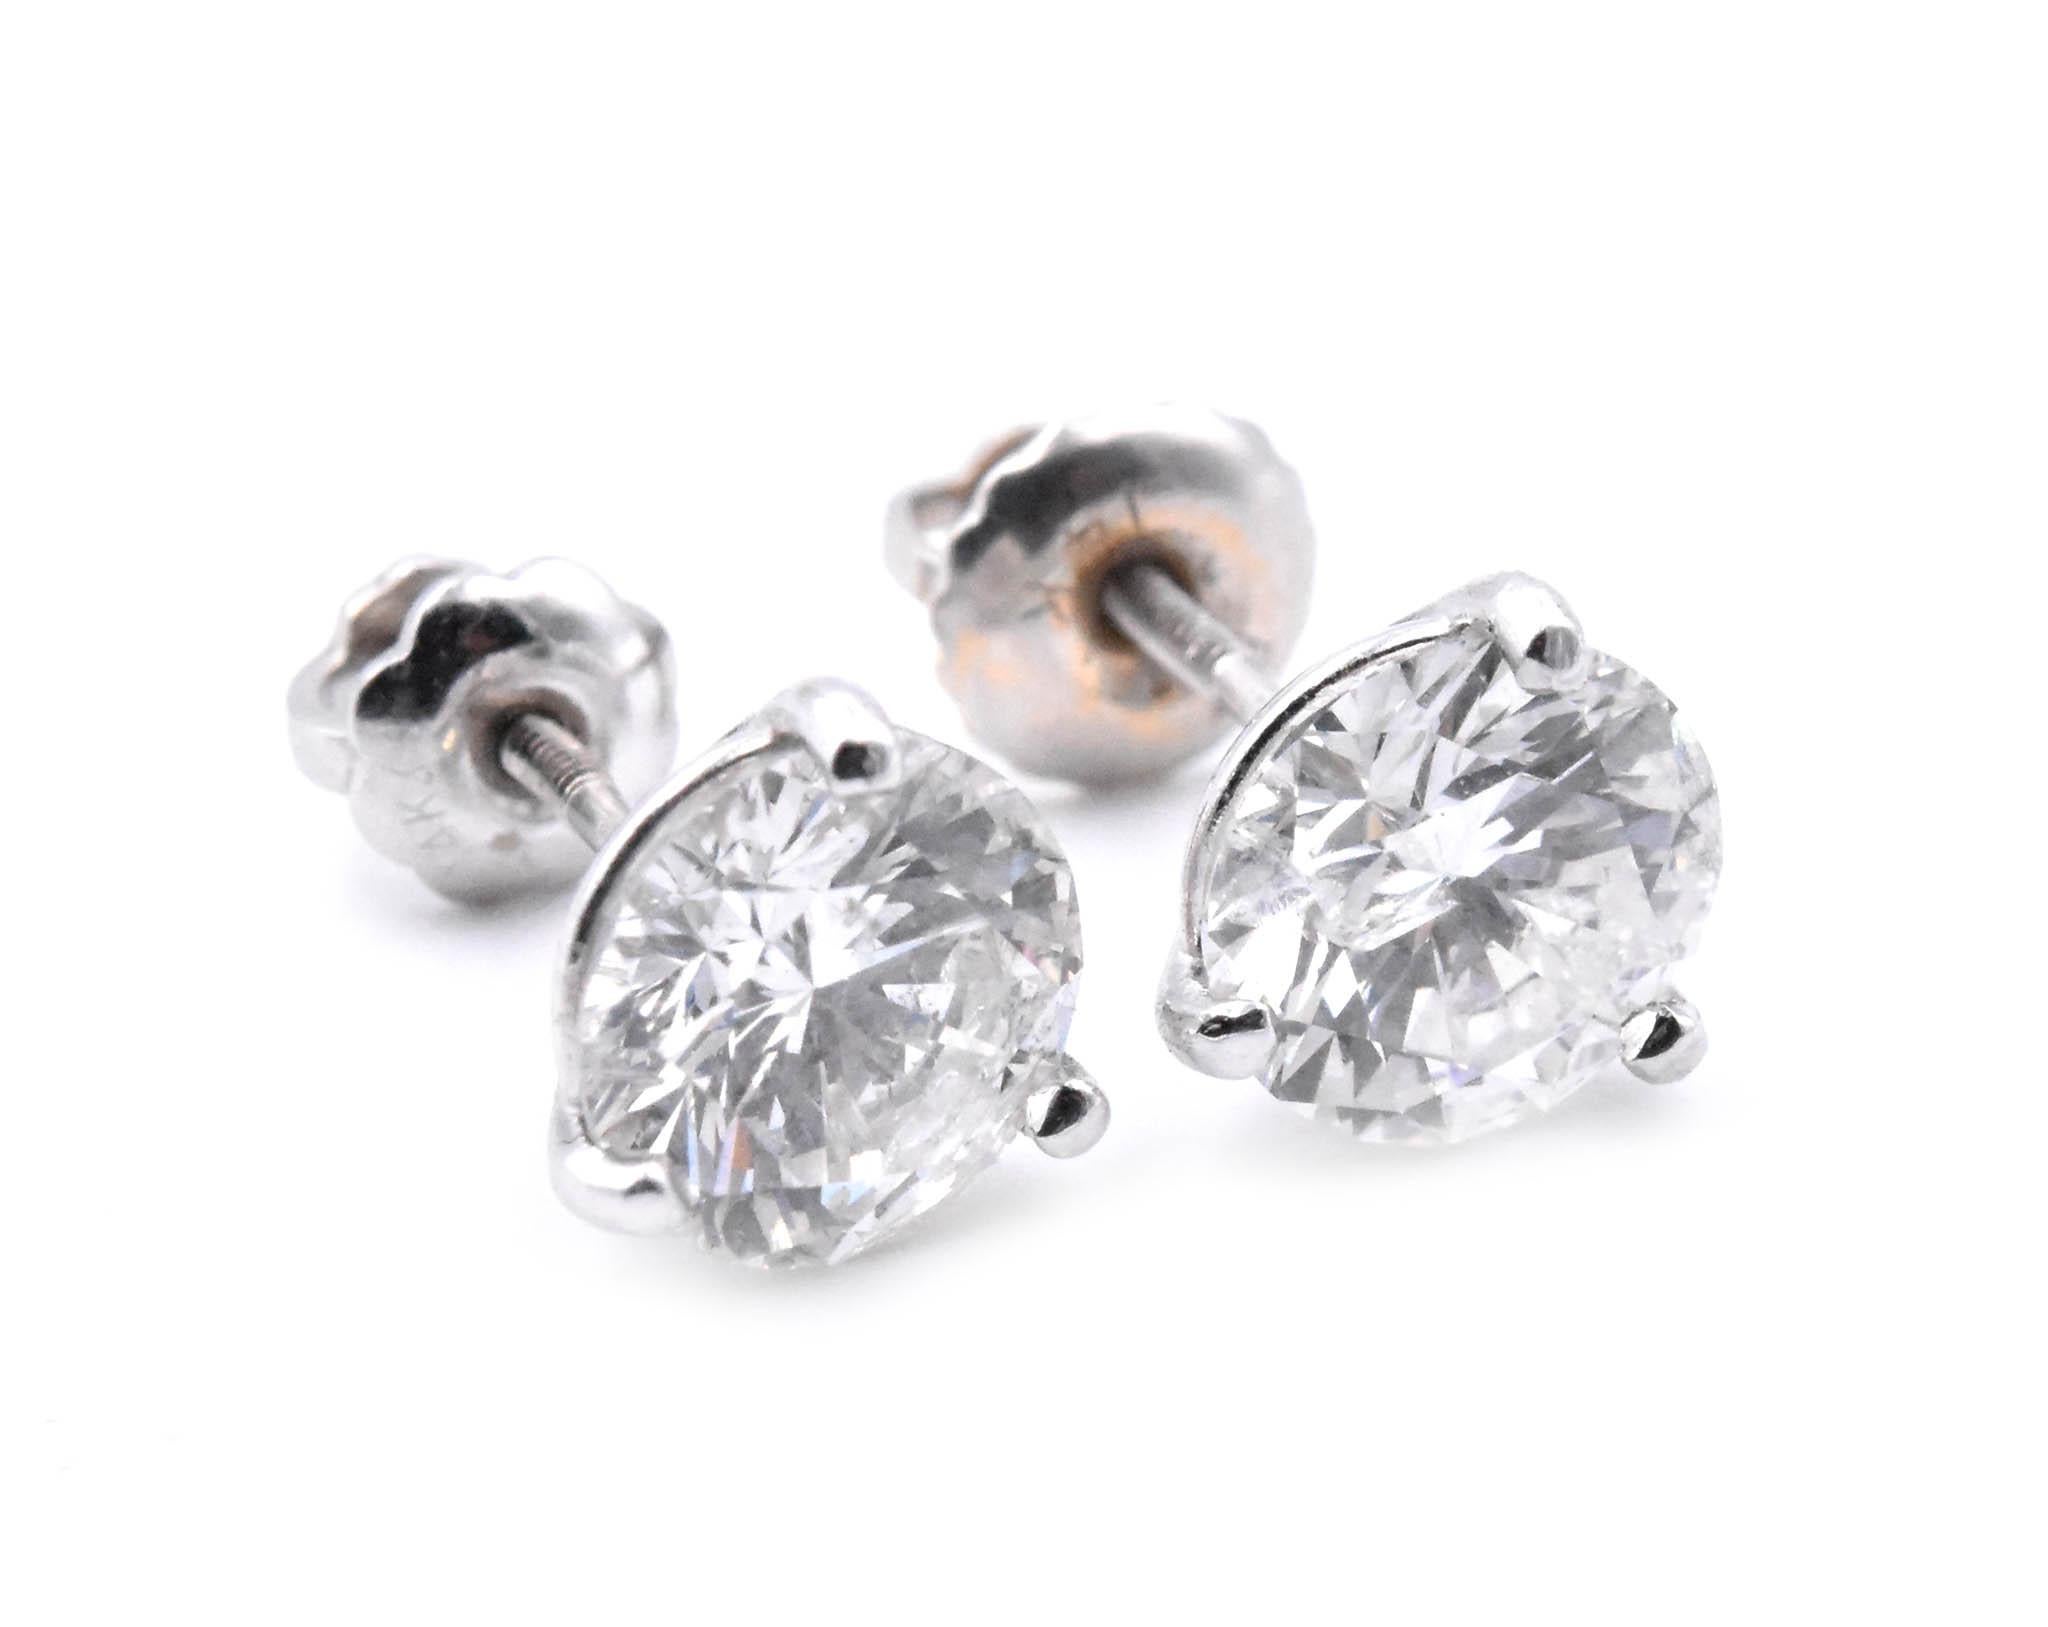 Material: 14k white gold
Diamonds: 2 round brilliant cut = 2.30cttw
Color: I
Clarity: SI3
Dimensions: earrings measure approximately 15mm x 6mm
Fastenings: post with screw backs
Weight:  1.58 grams
